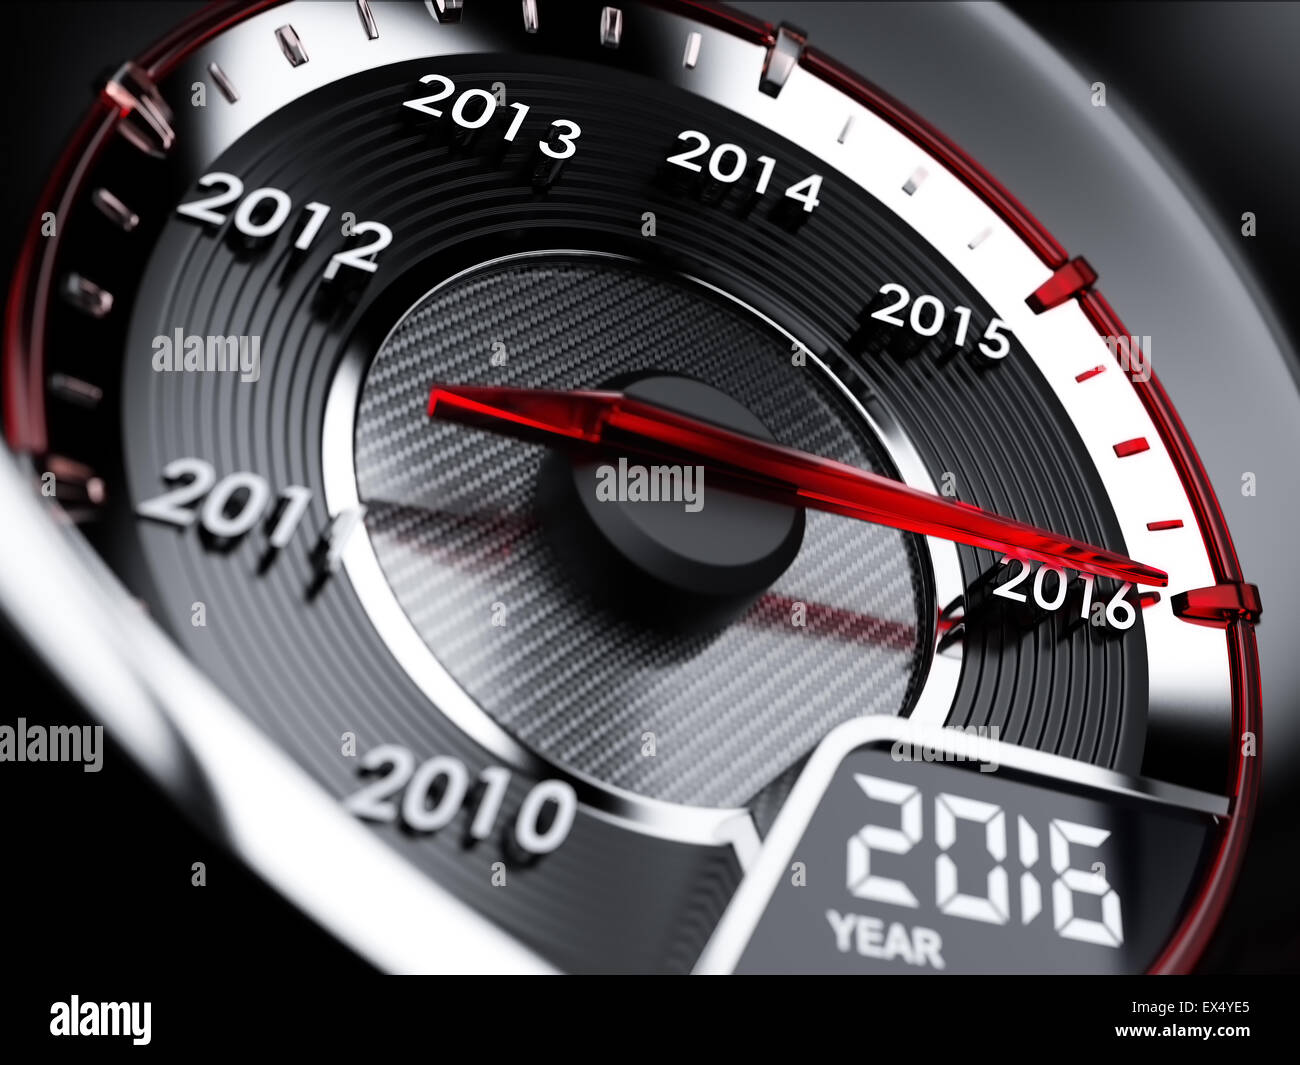 3d illustration of 2016 year car speedometer. Countdown concept Stock Photo